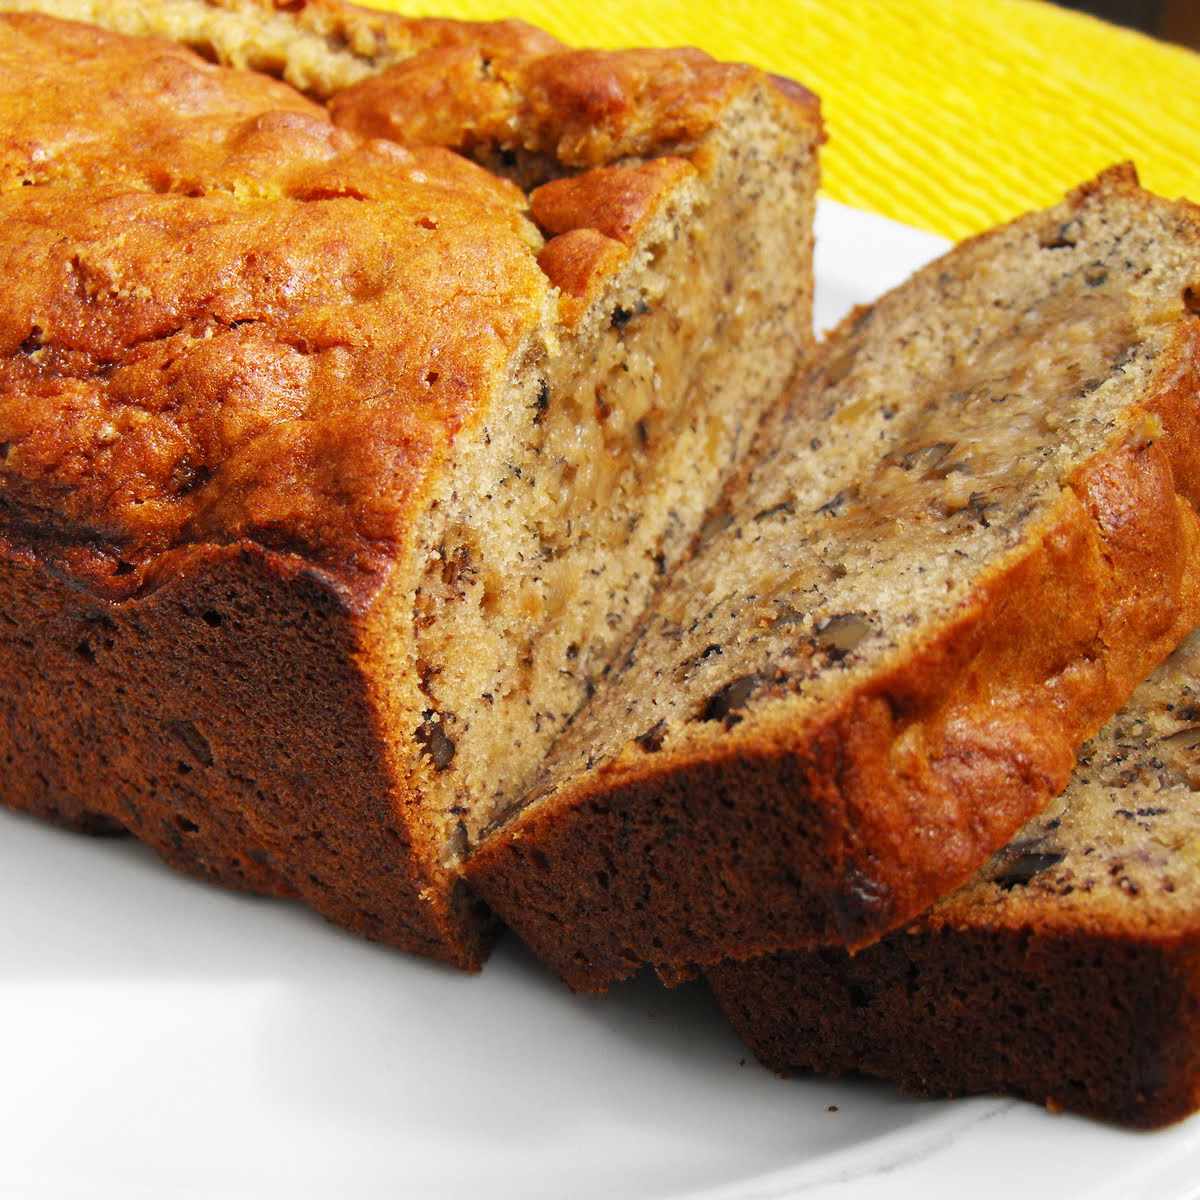 Close up view of sliced Banana Nut Bread on a plate